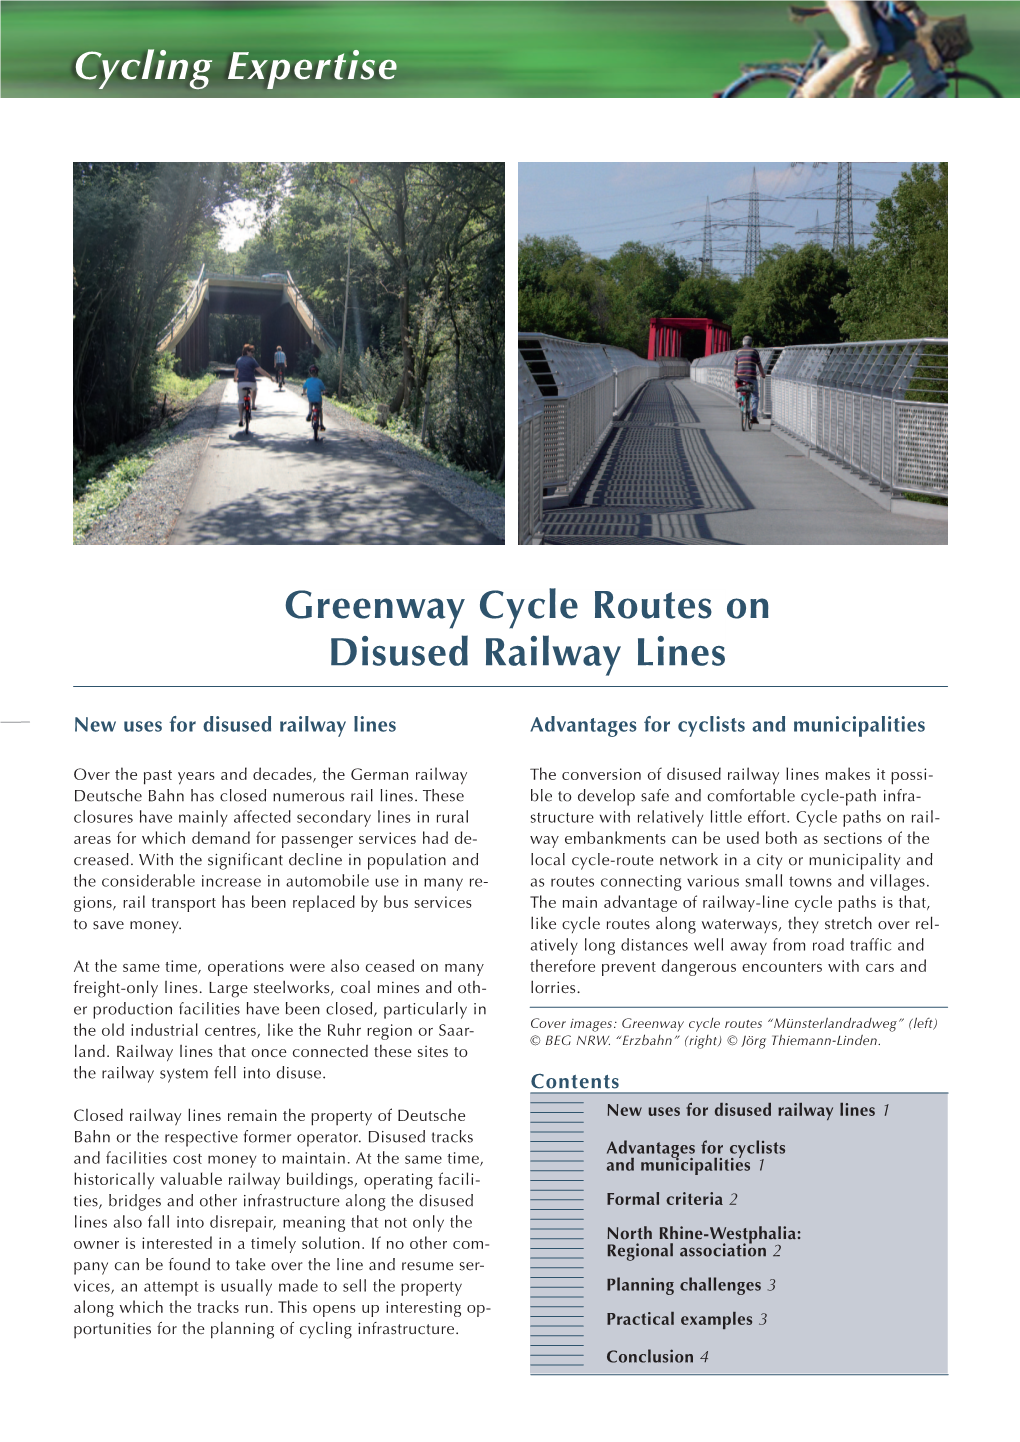 Cycling Expertise Greenway Cycle Routes on Disused Railway Lines